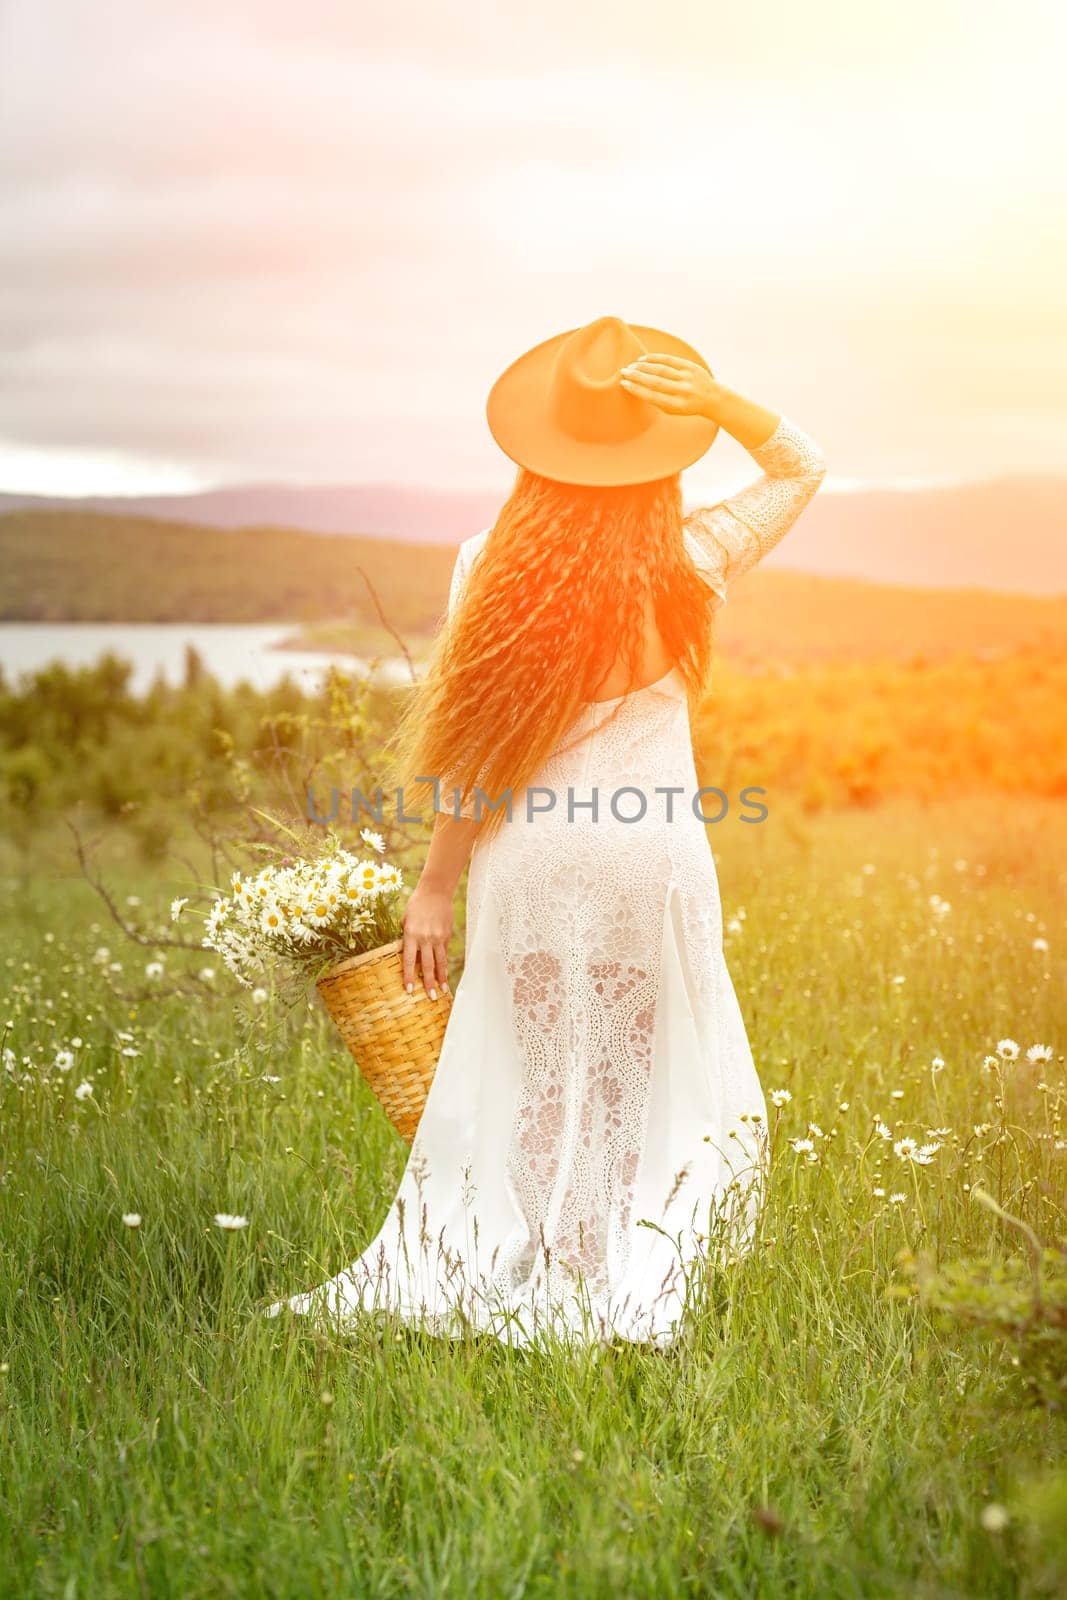 A middle-aged woman in a white dress and brown hat stands with her back on a green field and holds a basket in her hands with a large bouquet of daisies. In the background there are mountains and a lake. by Matiunina